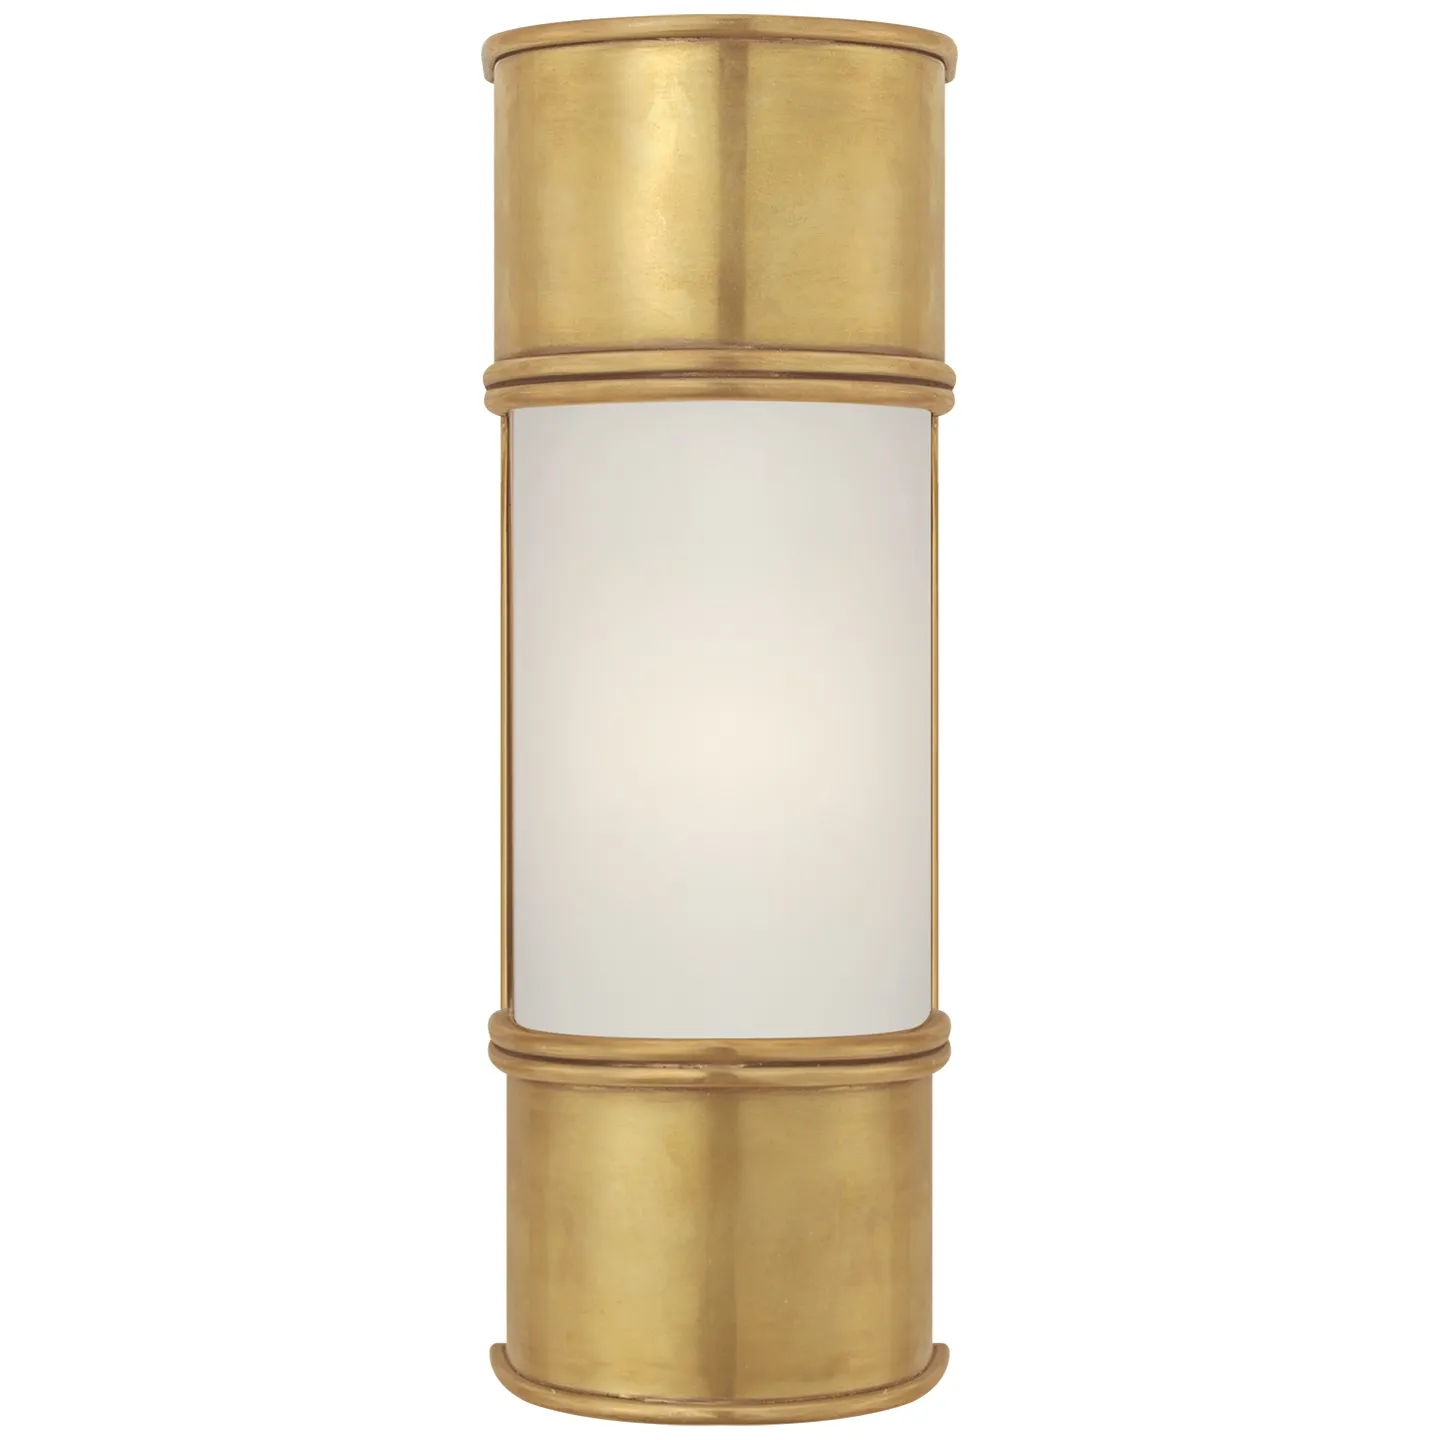 Oxford 12" Bath Sconce in Antique-Burnished Brass